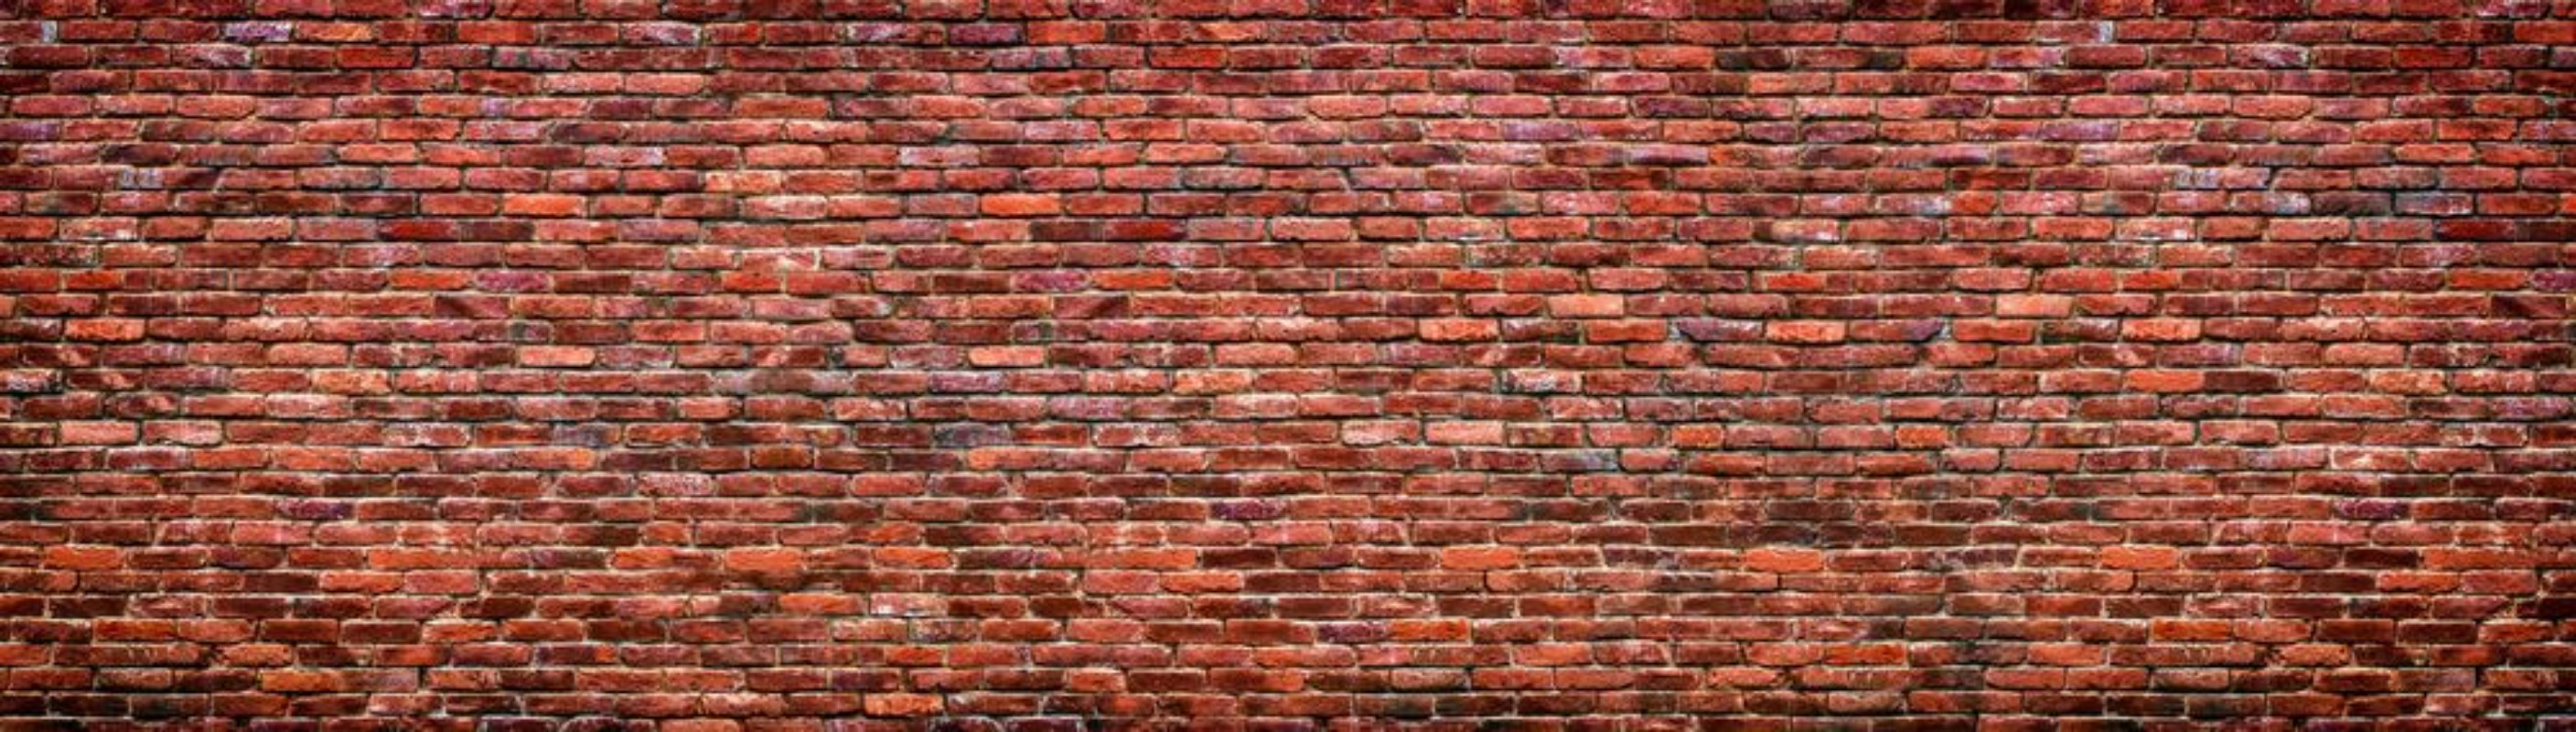 Image de Old brick wall background Panoramic texture of red stone